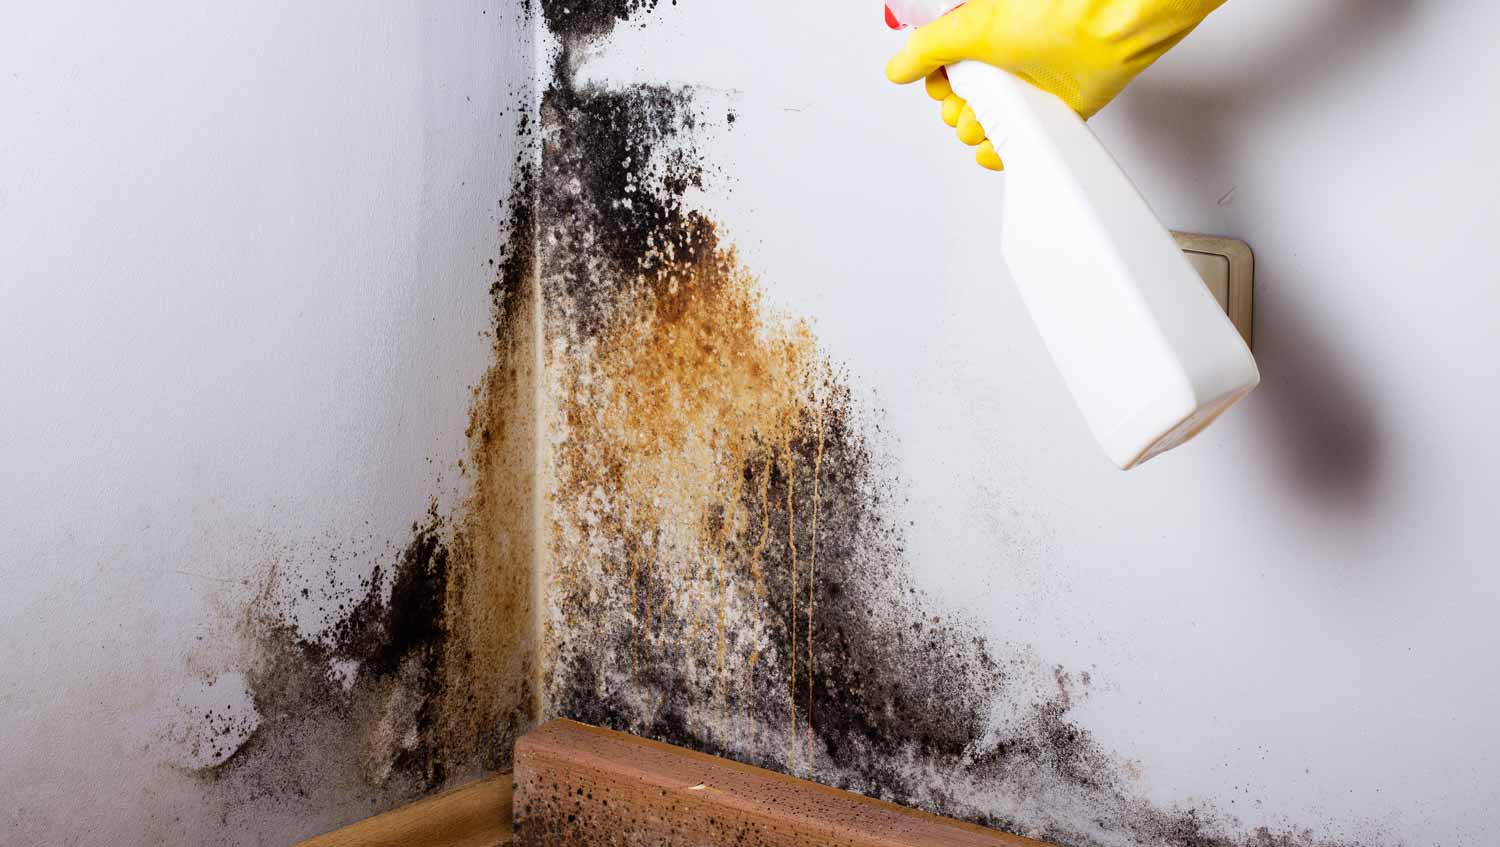 Mold Removal Franklinton NC mold remediation in Franklinton NC